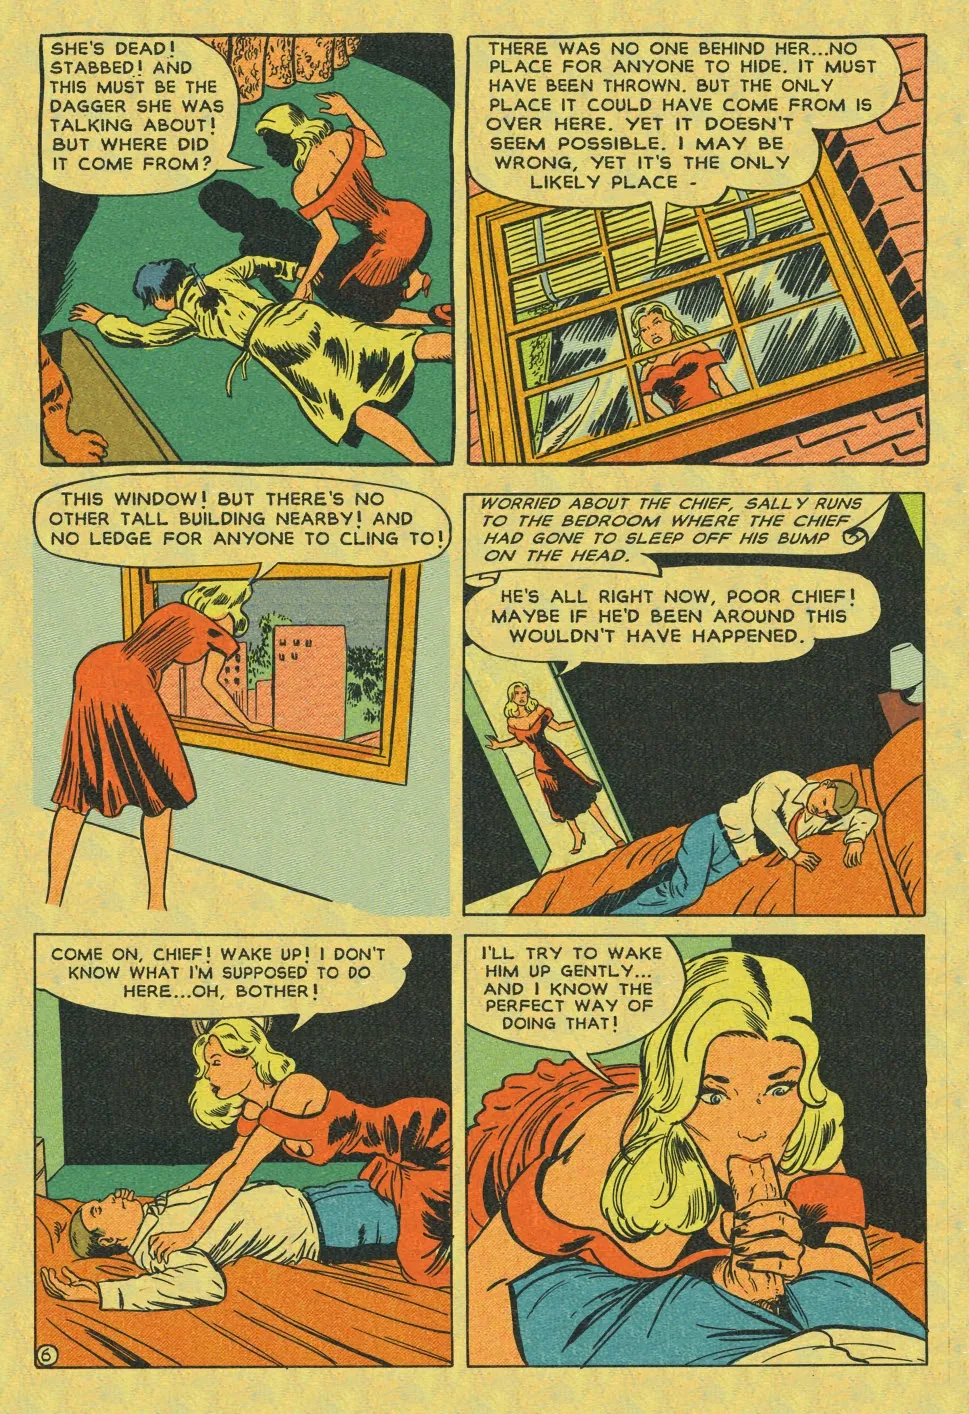 Crime Smashers! 2- The Wertham Files - Page 7